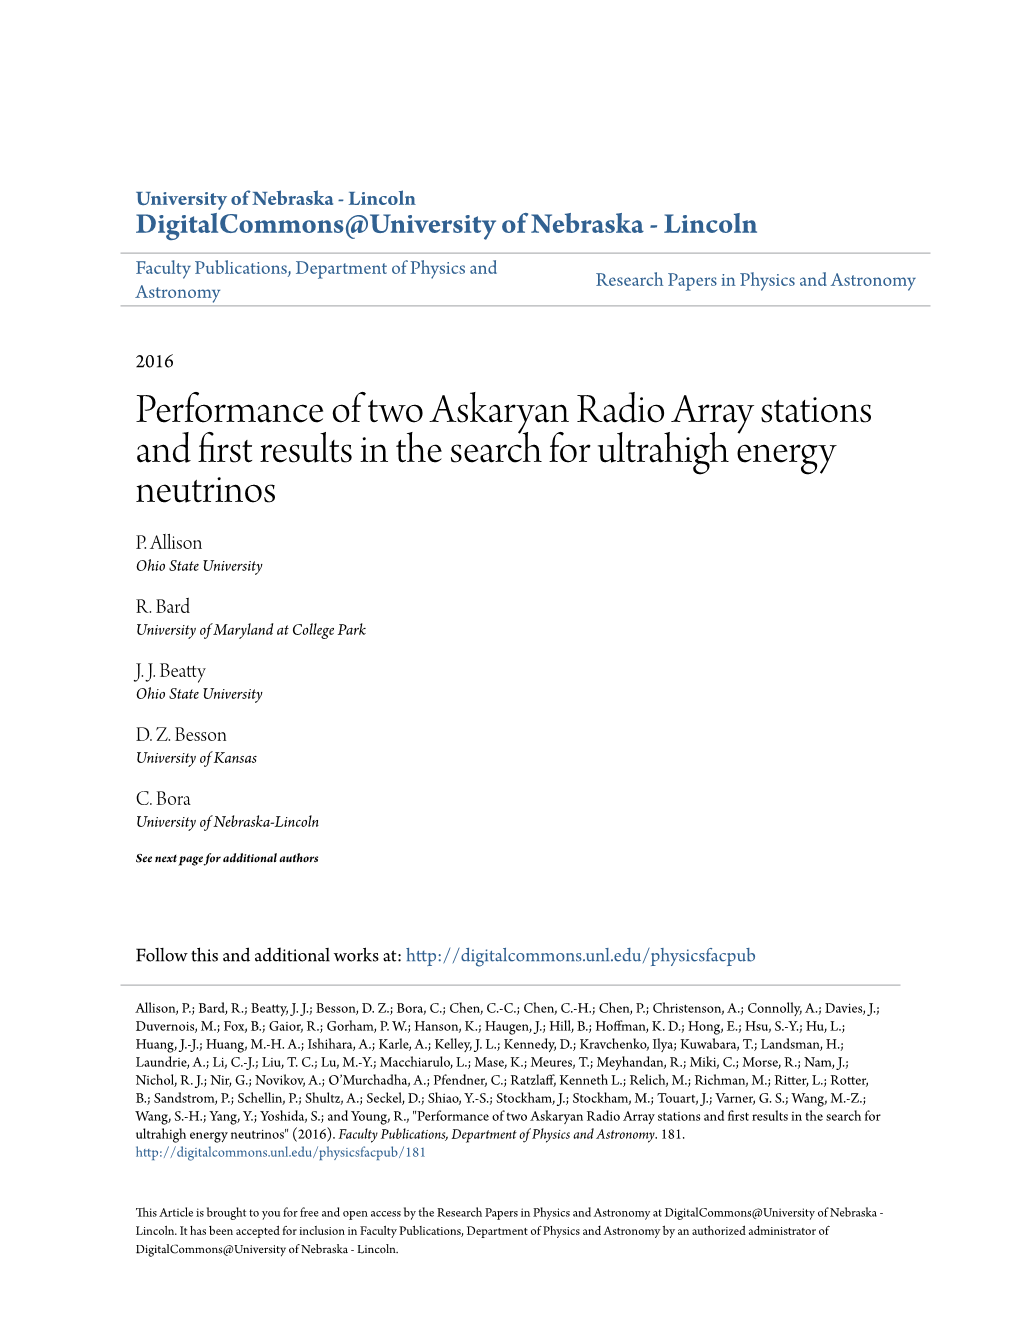 Performance of Two Askaryan Radio Array Stations and First Results in the Search for Ultrahigh Energy Neutrinos P